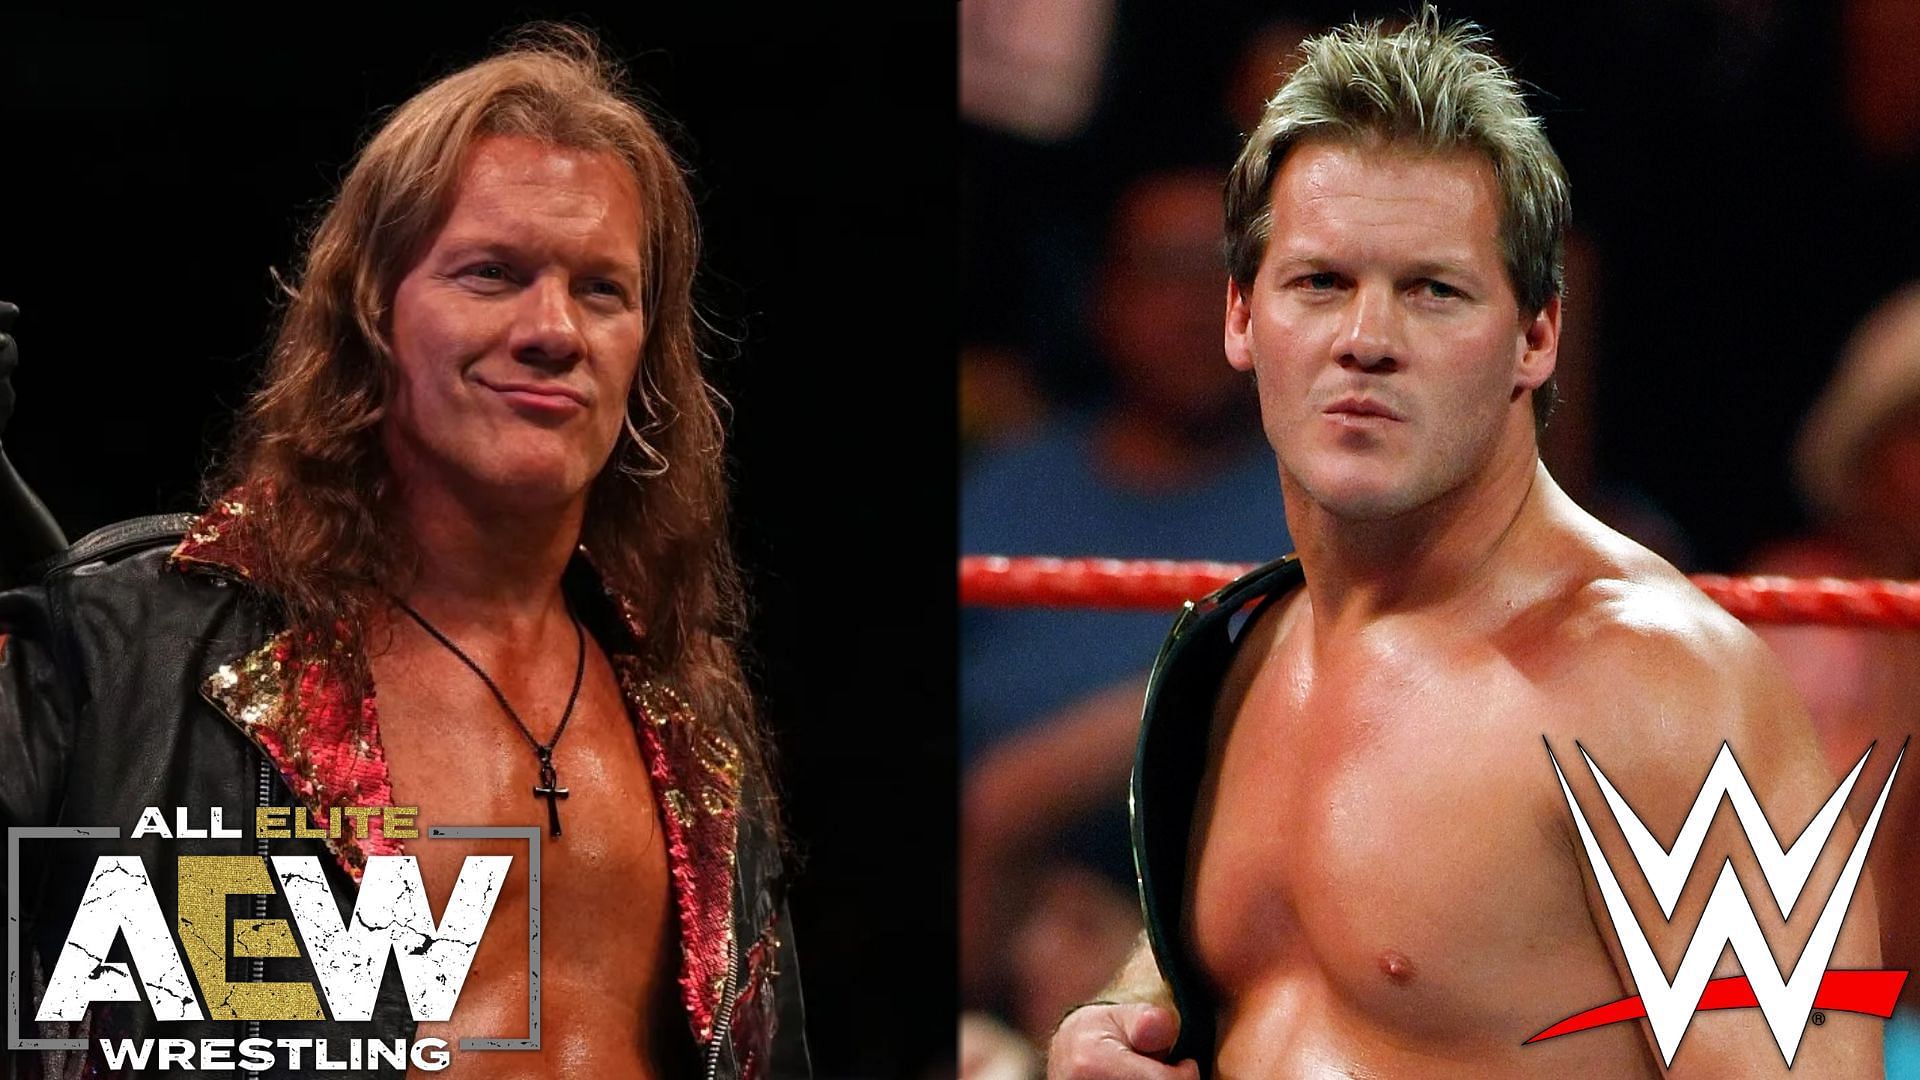 Chris Jericho has been a top star in both AEW and WWE.